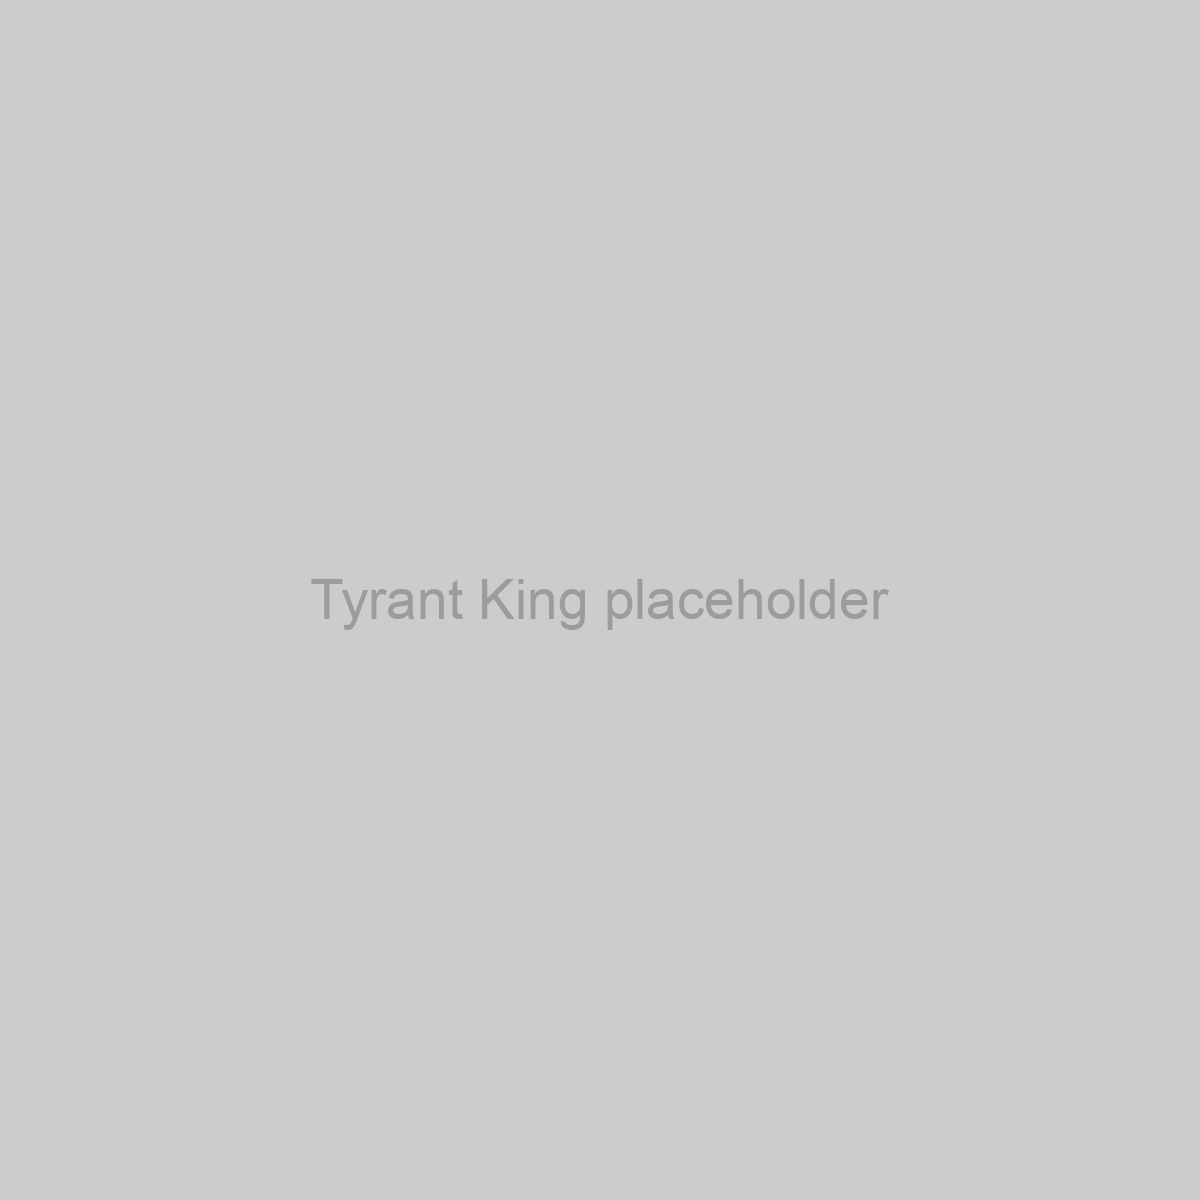 Tyrant King Placeholder Image